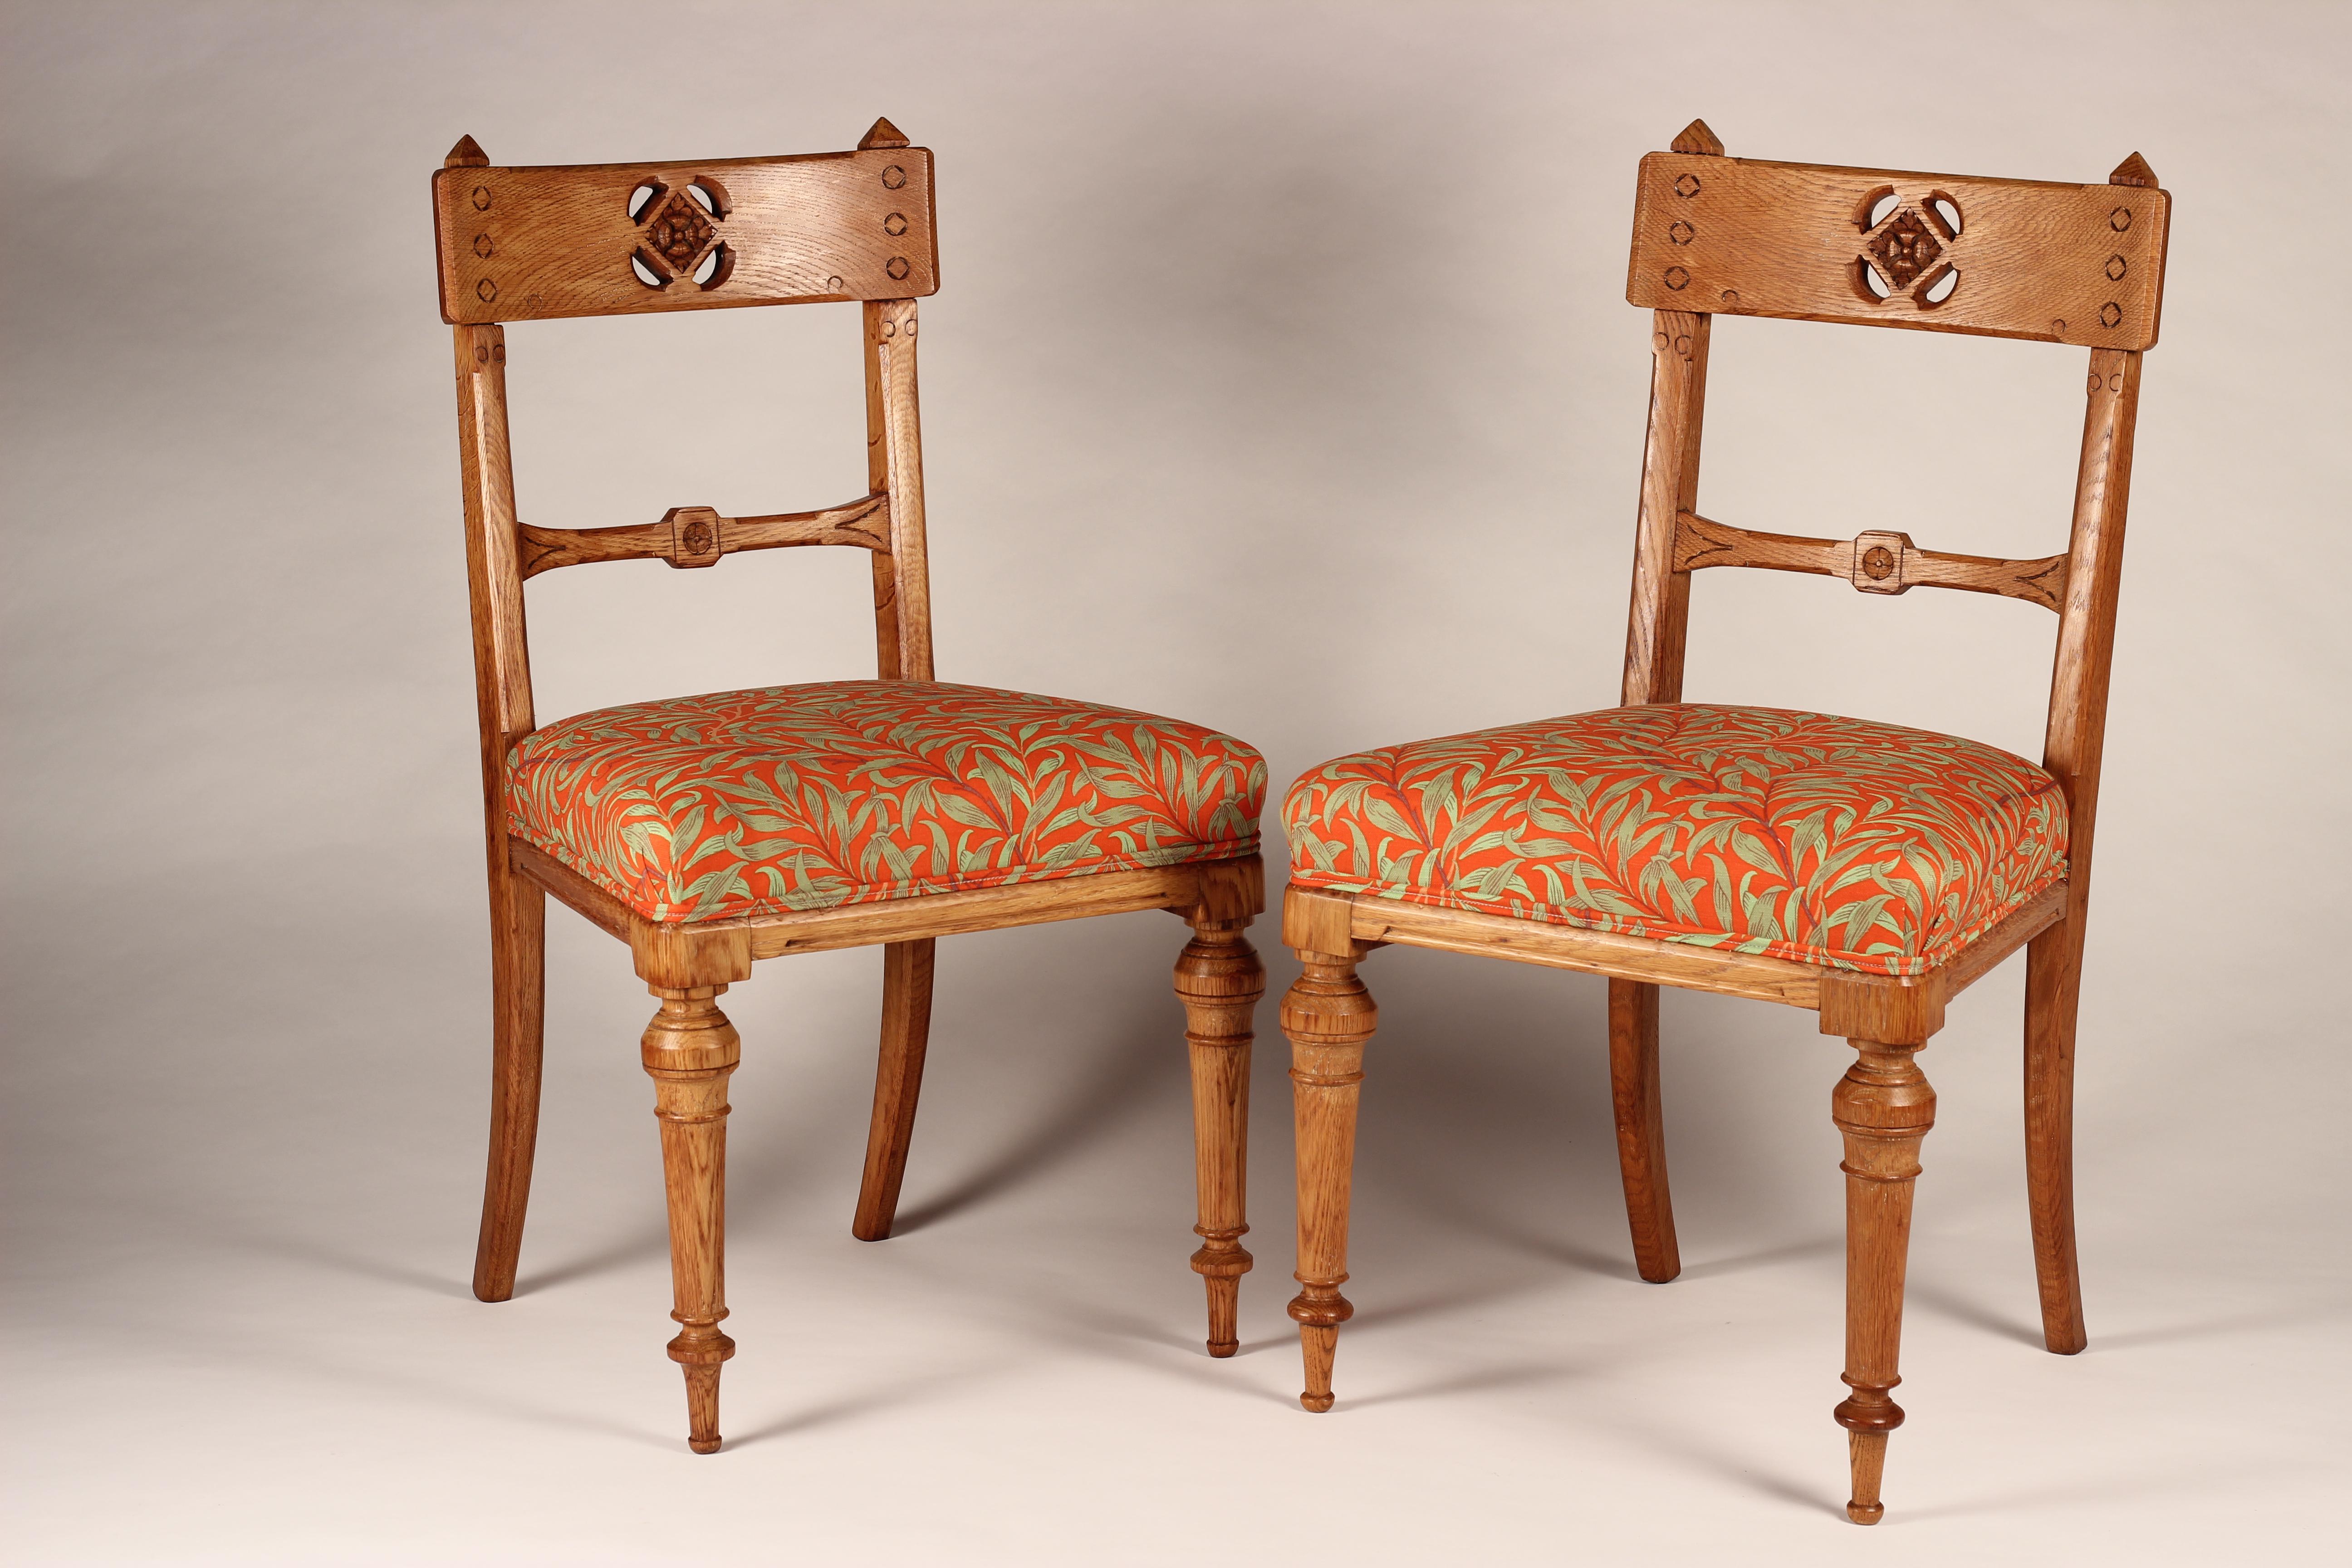 A Pair of Arts & Crafts Oak, back pierced hall chairs with re upholstered in Willow Bough Tomato Olive by Morris & Co from the Queen Square fabrics by Ben Pentreath.

Fabric details:
Product Type Print
Care Do Not Wash Warm Iron Dry Cleanable Do